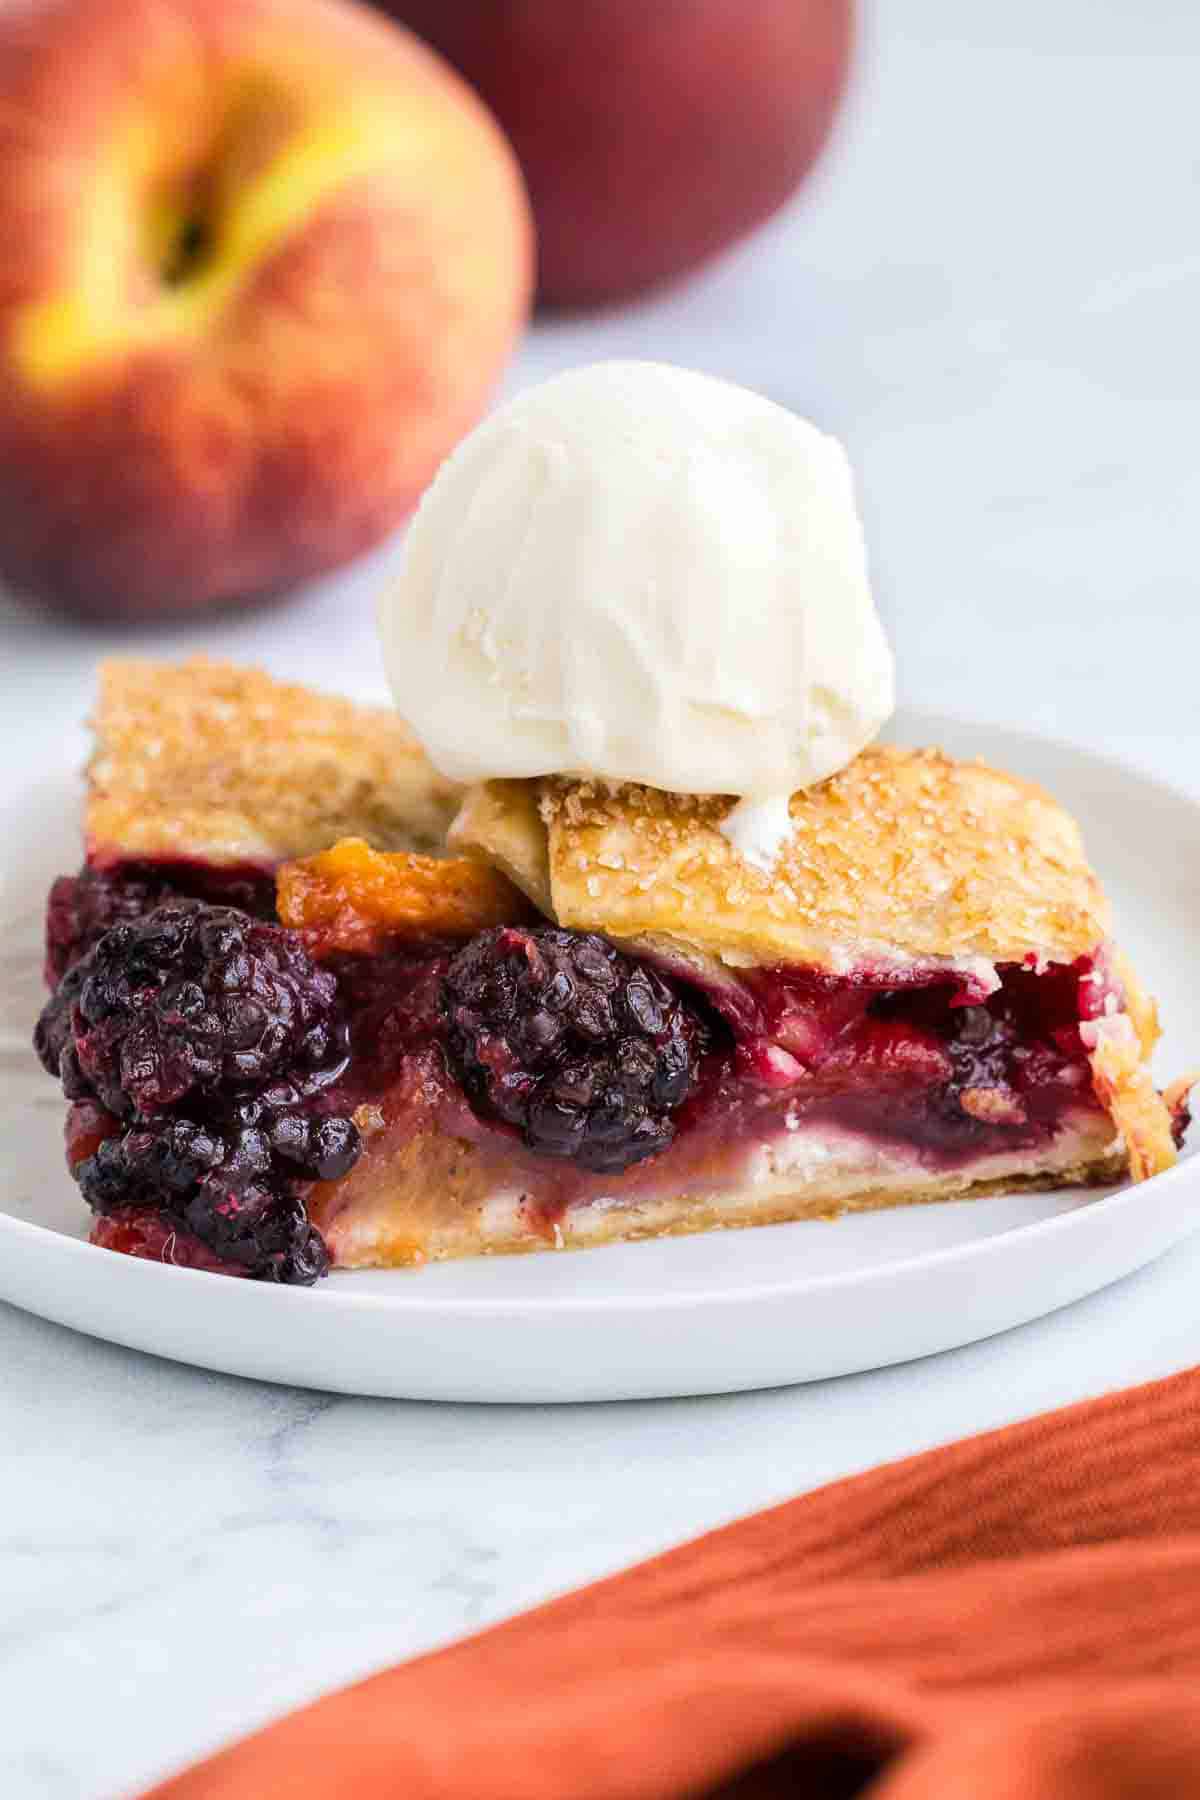 Peach and Blackberry Galette